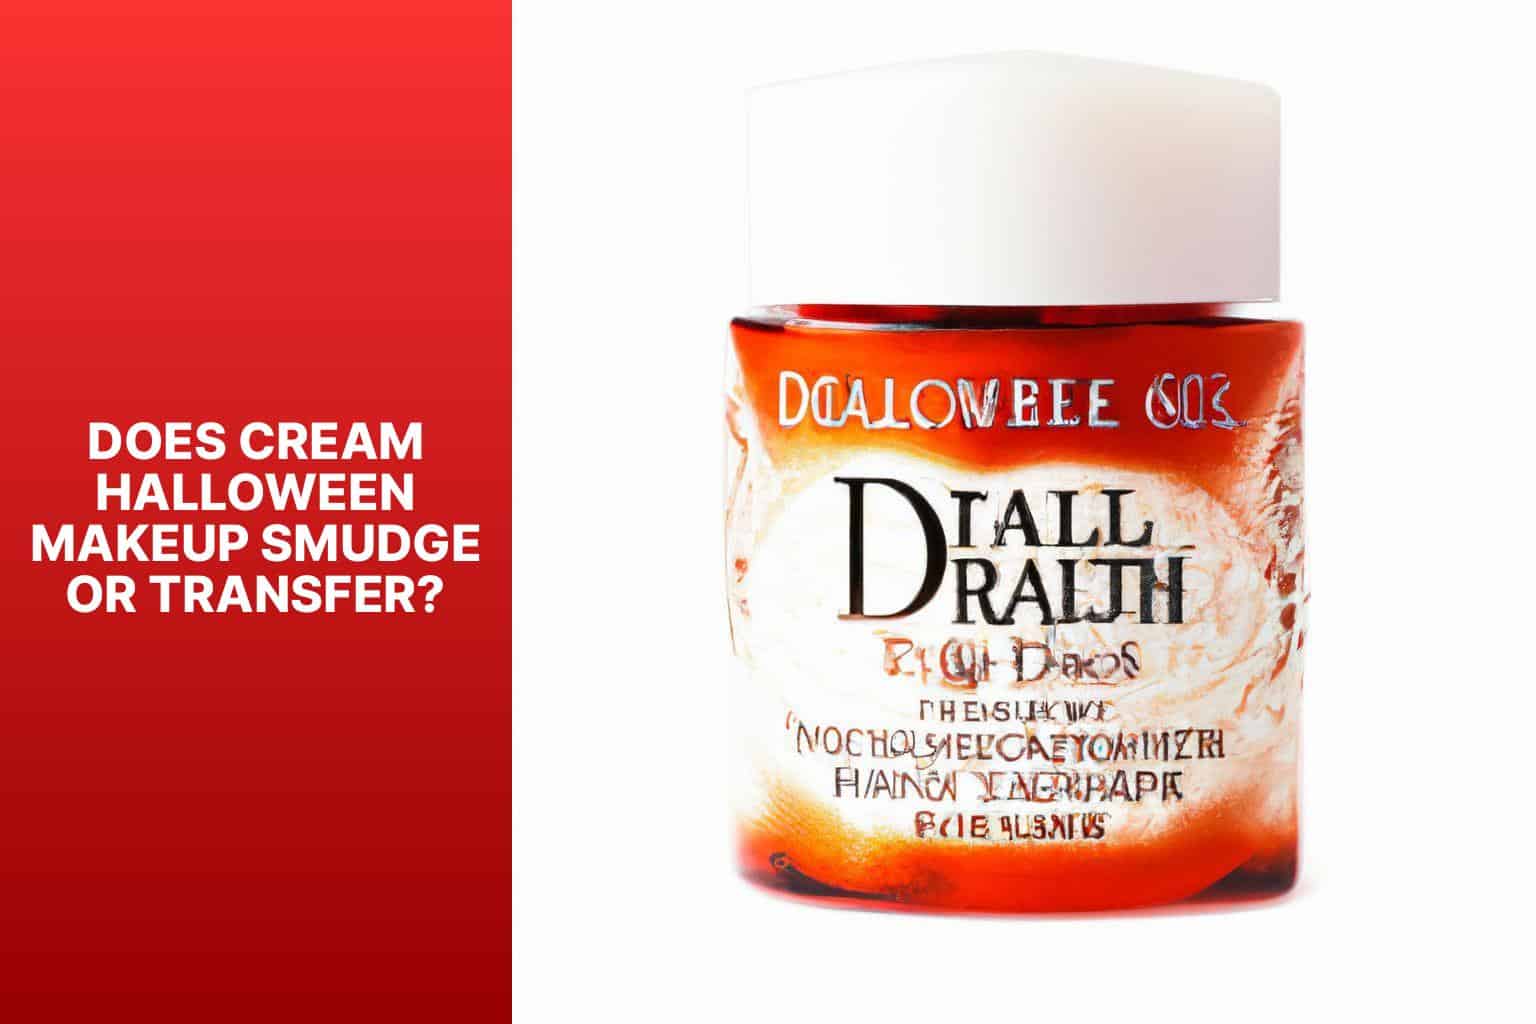 Does Cream Halloween Makeup Smudge or Transfer? - does cream halloween makeup dry 